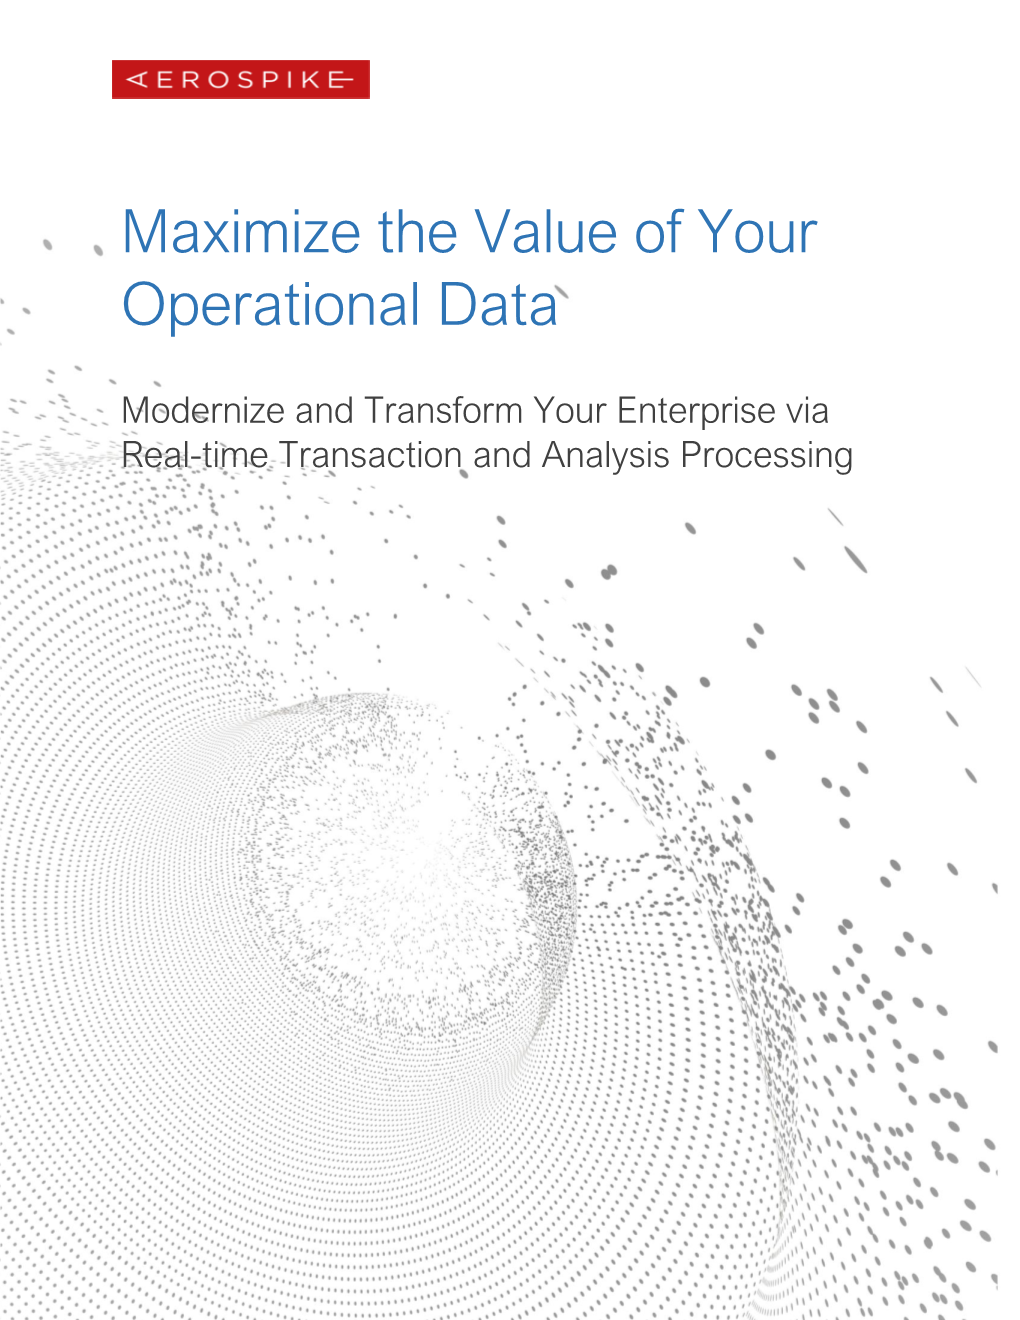 Maximize the Value of Your Operational Data